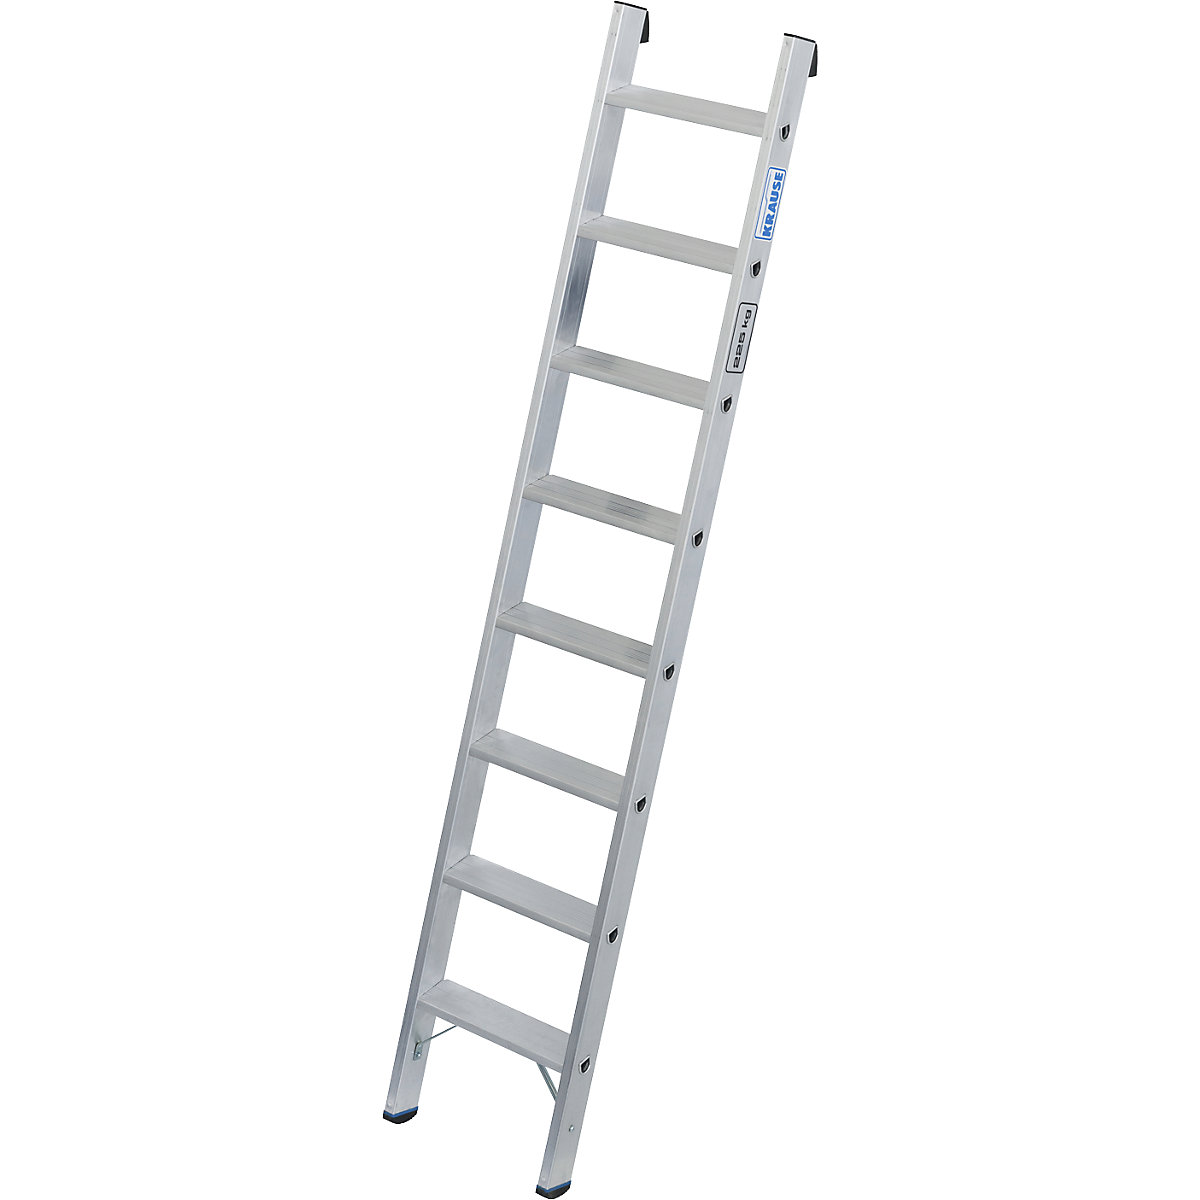 Heavy duty lean to ladder – KRAUSE, 80 mm aluminium steps, up to 225 kg, 8 steps-5